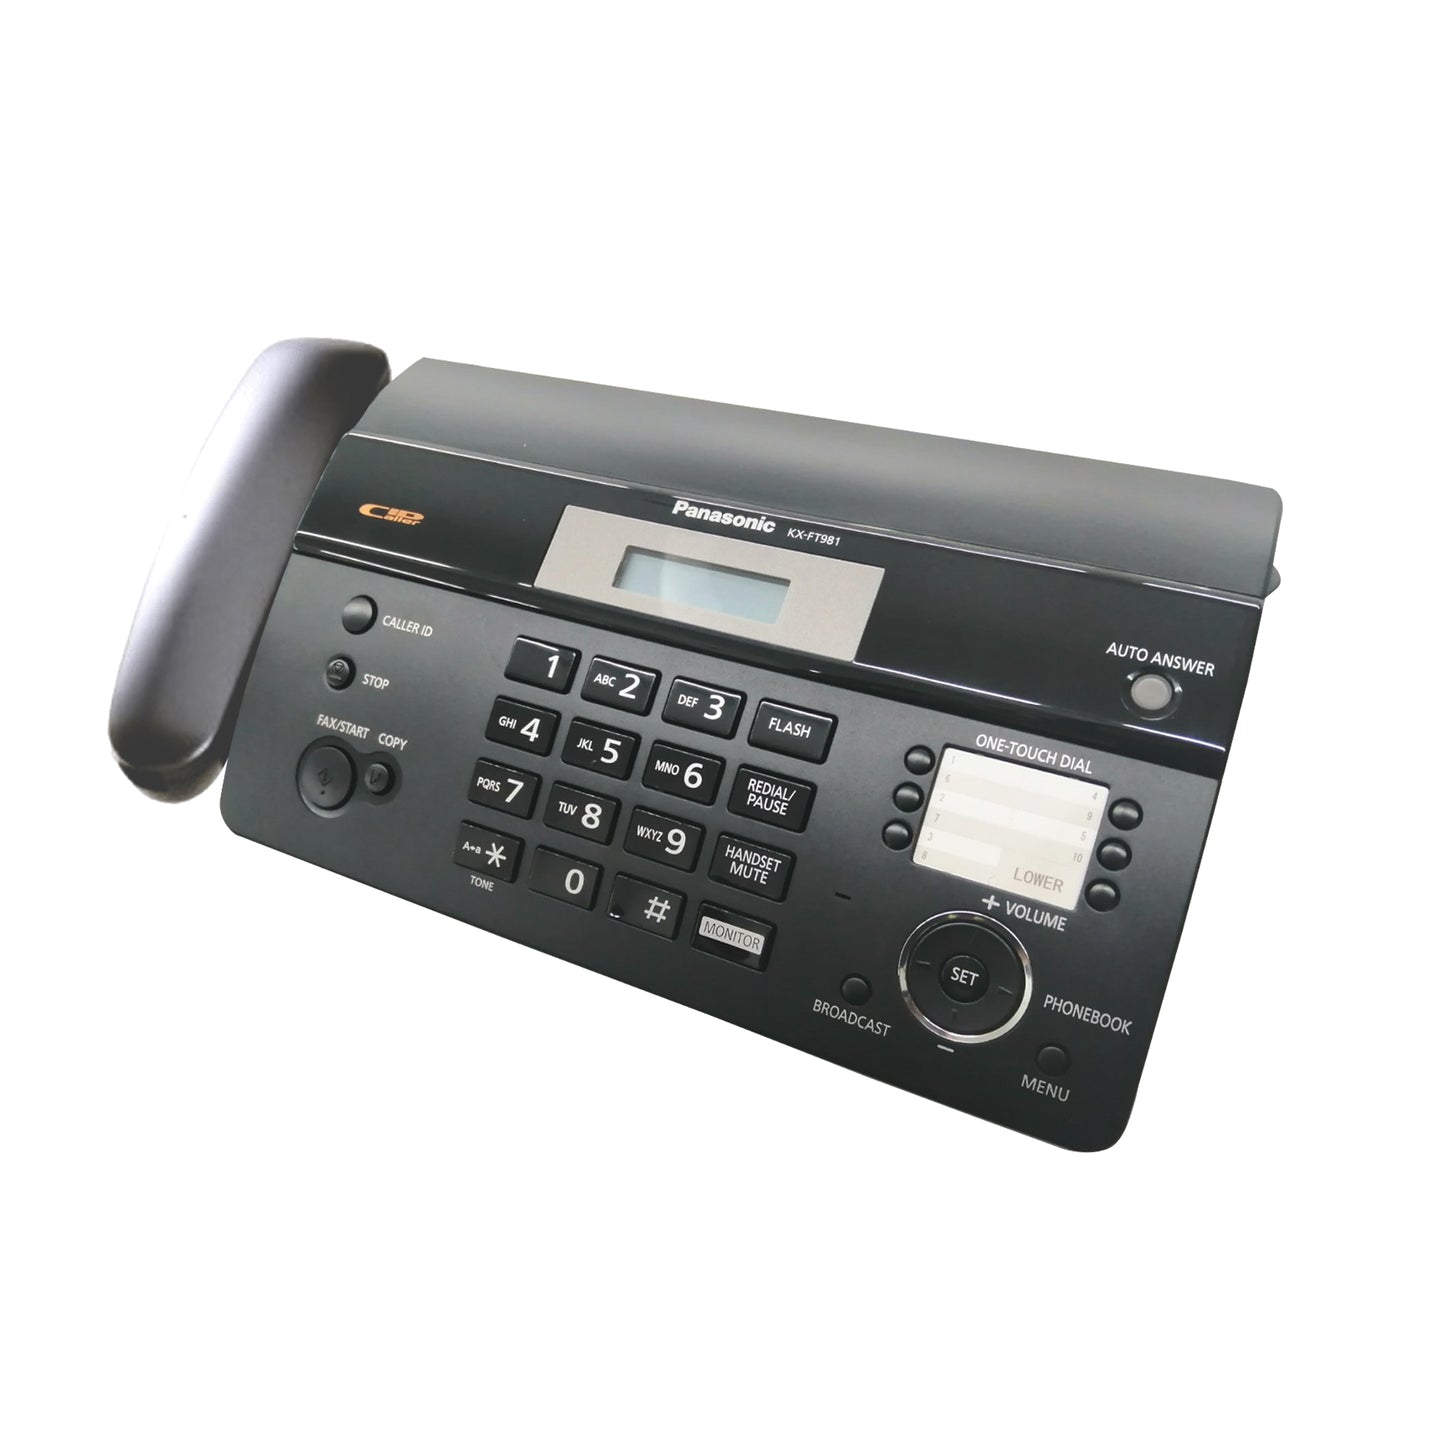 Panasonic KX-FT981CX Thermal Fax Machine with Caller ID without Auto Cutter Black